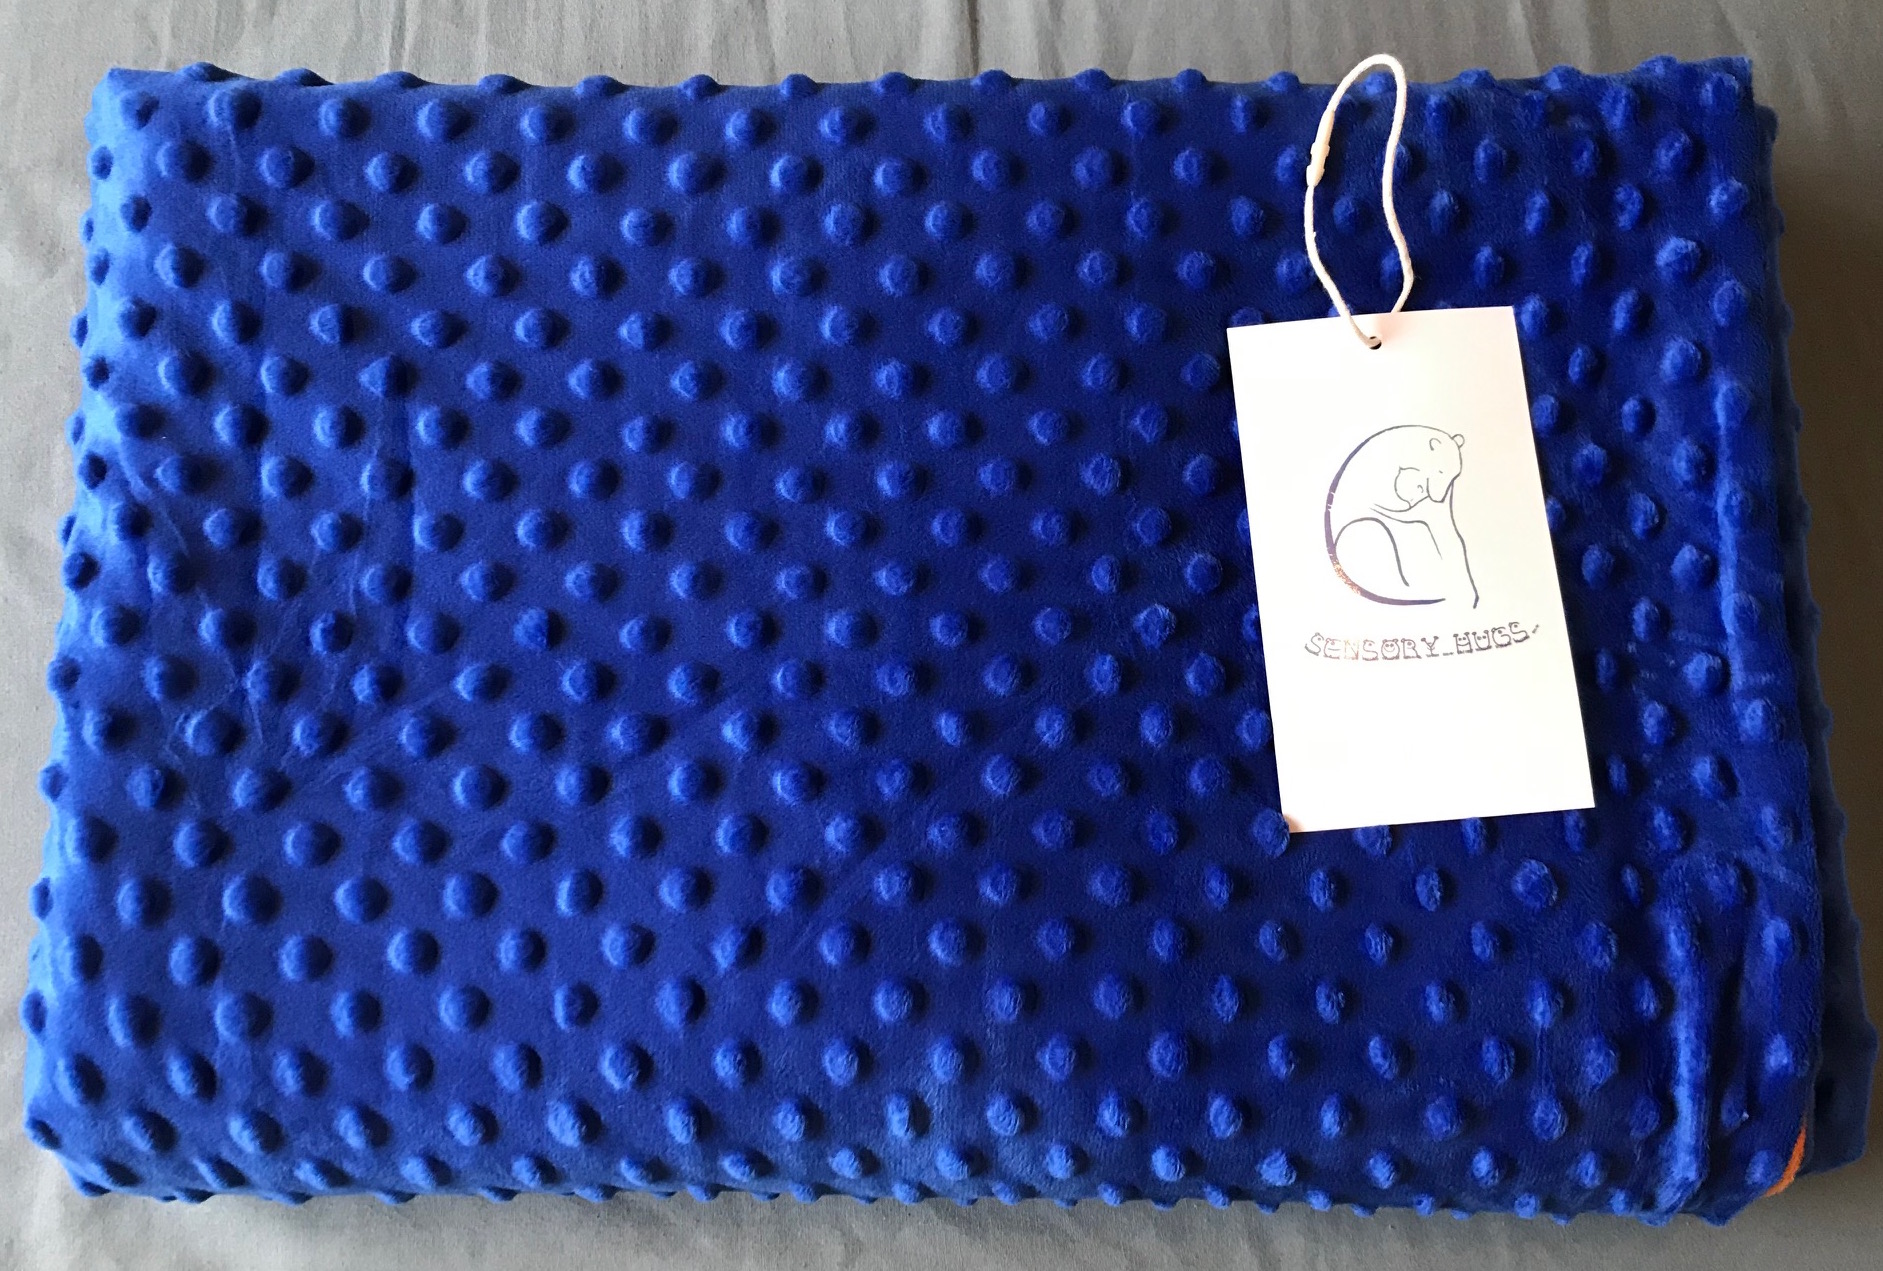 Weighted Blanket & Soft removable cover. 122cm x 183cm (48" x 72") in